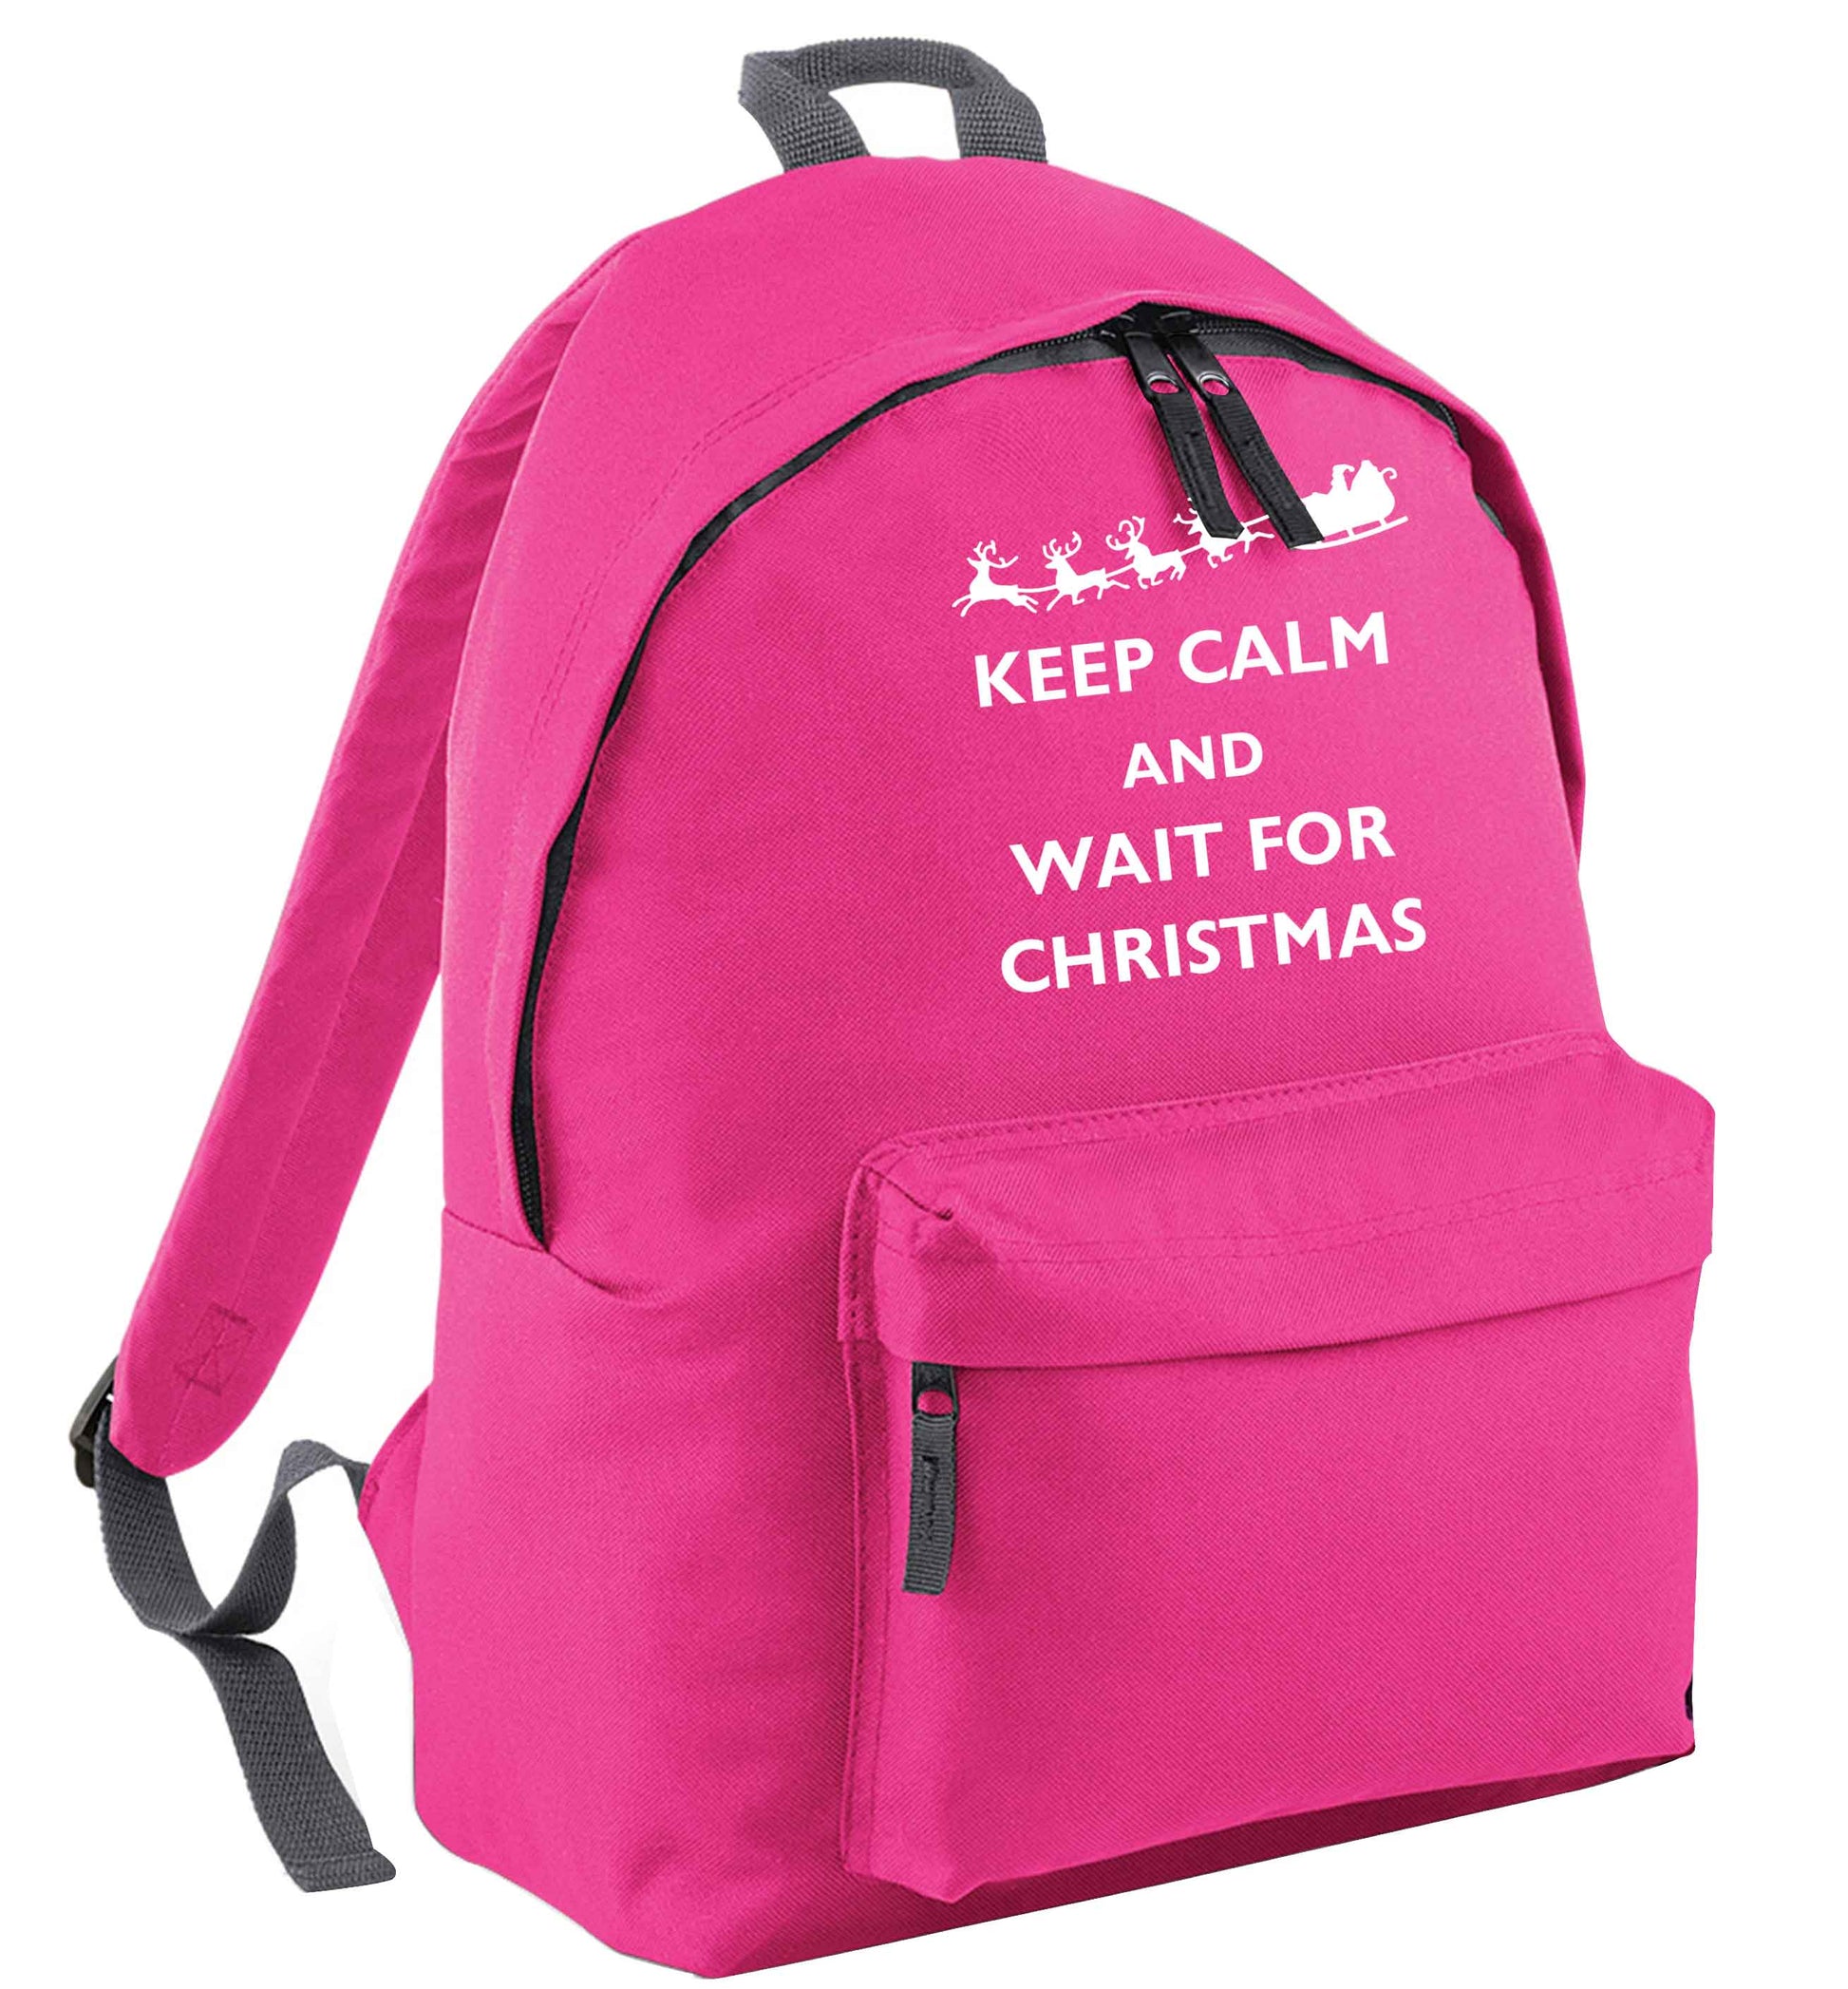 Keep calm and wait for Christmas pink adults backpack